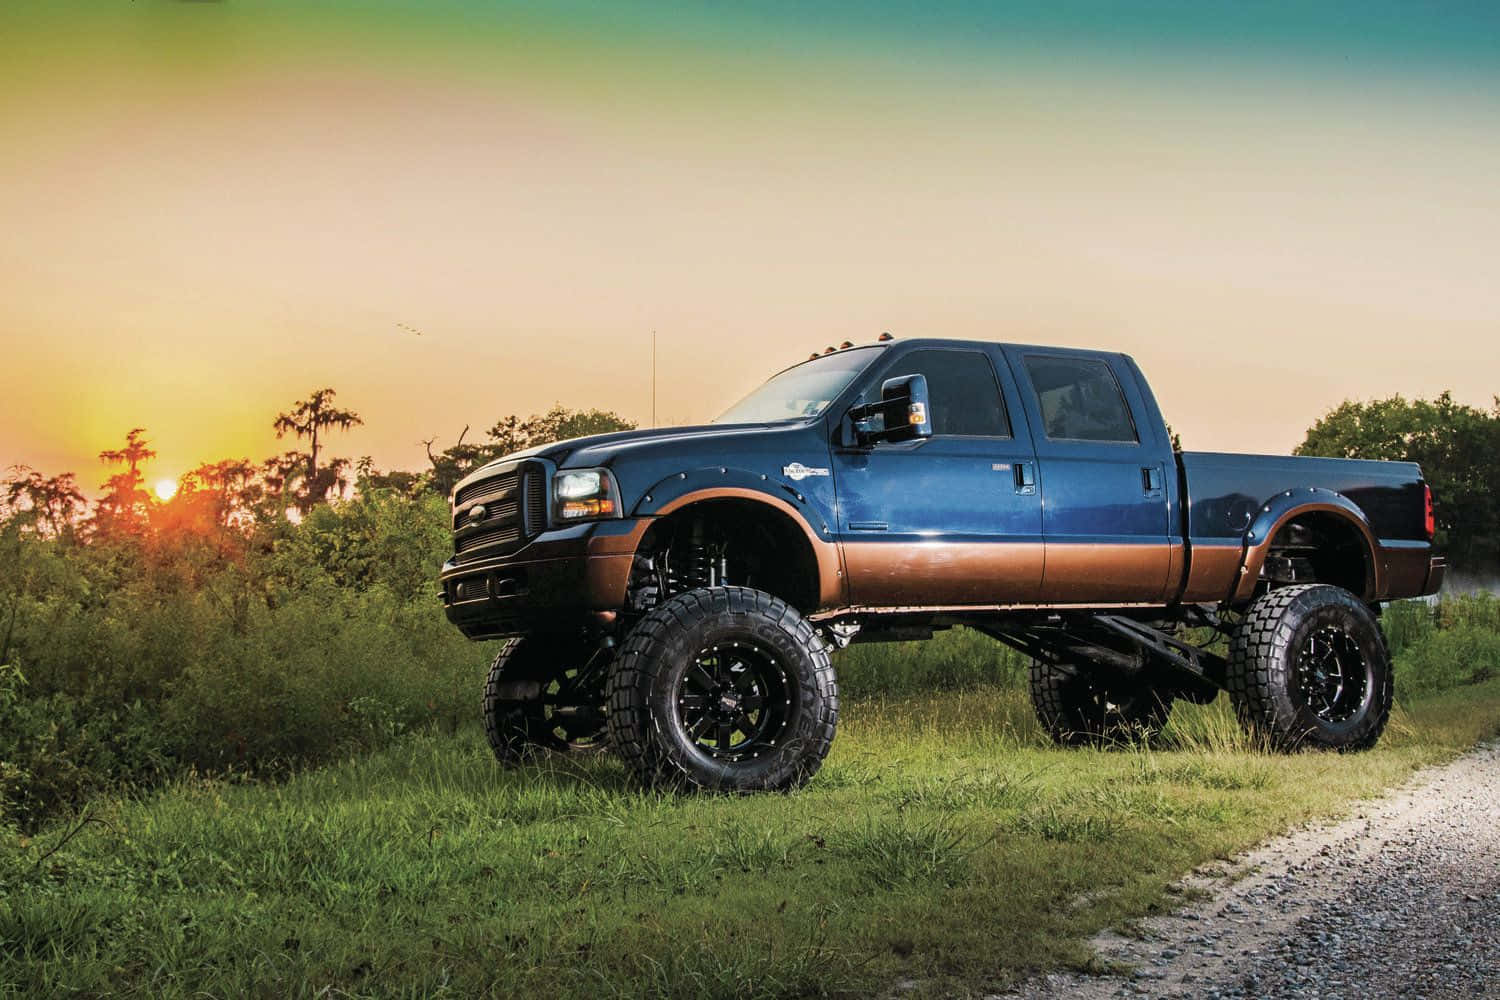 Lifted Ford Powerstroke Wallpaper